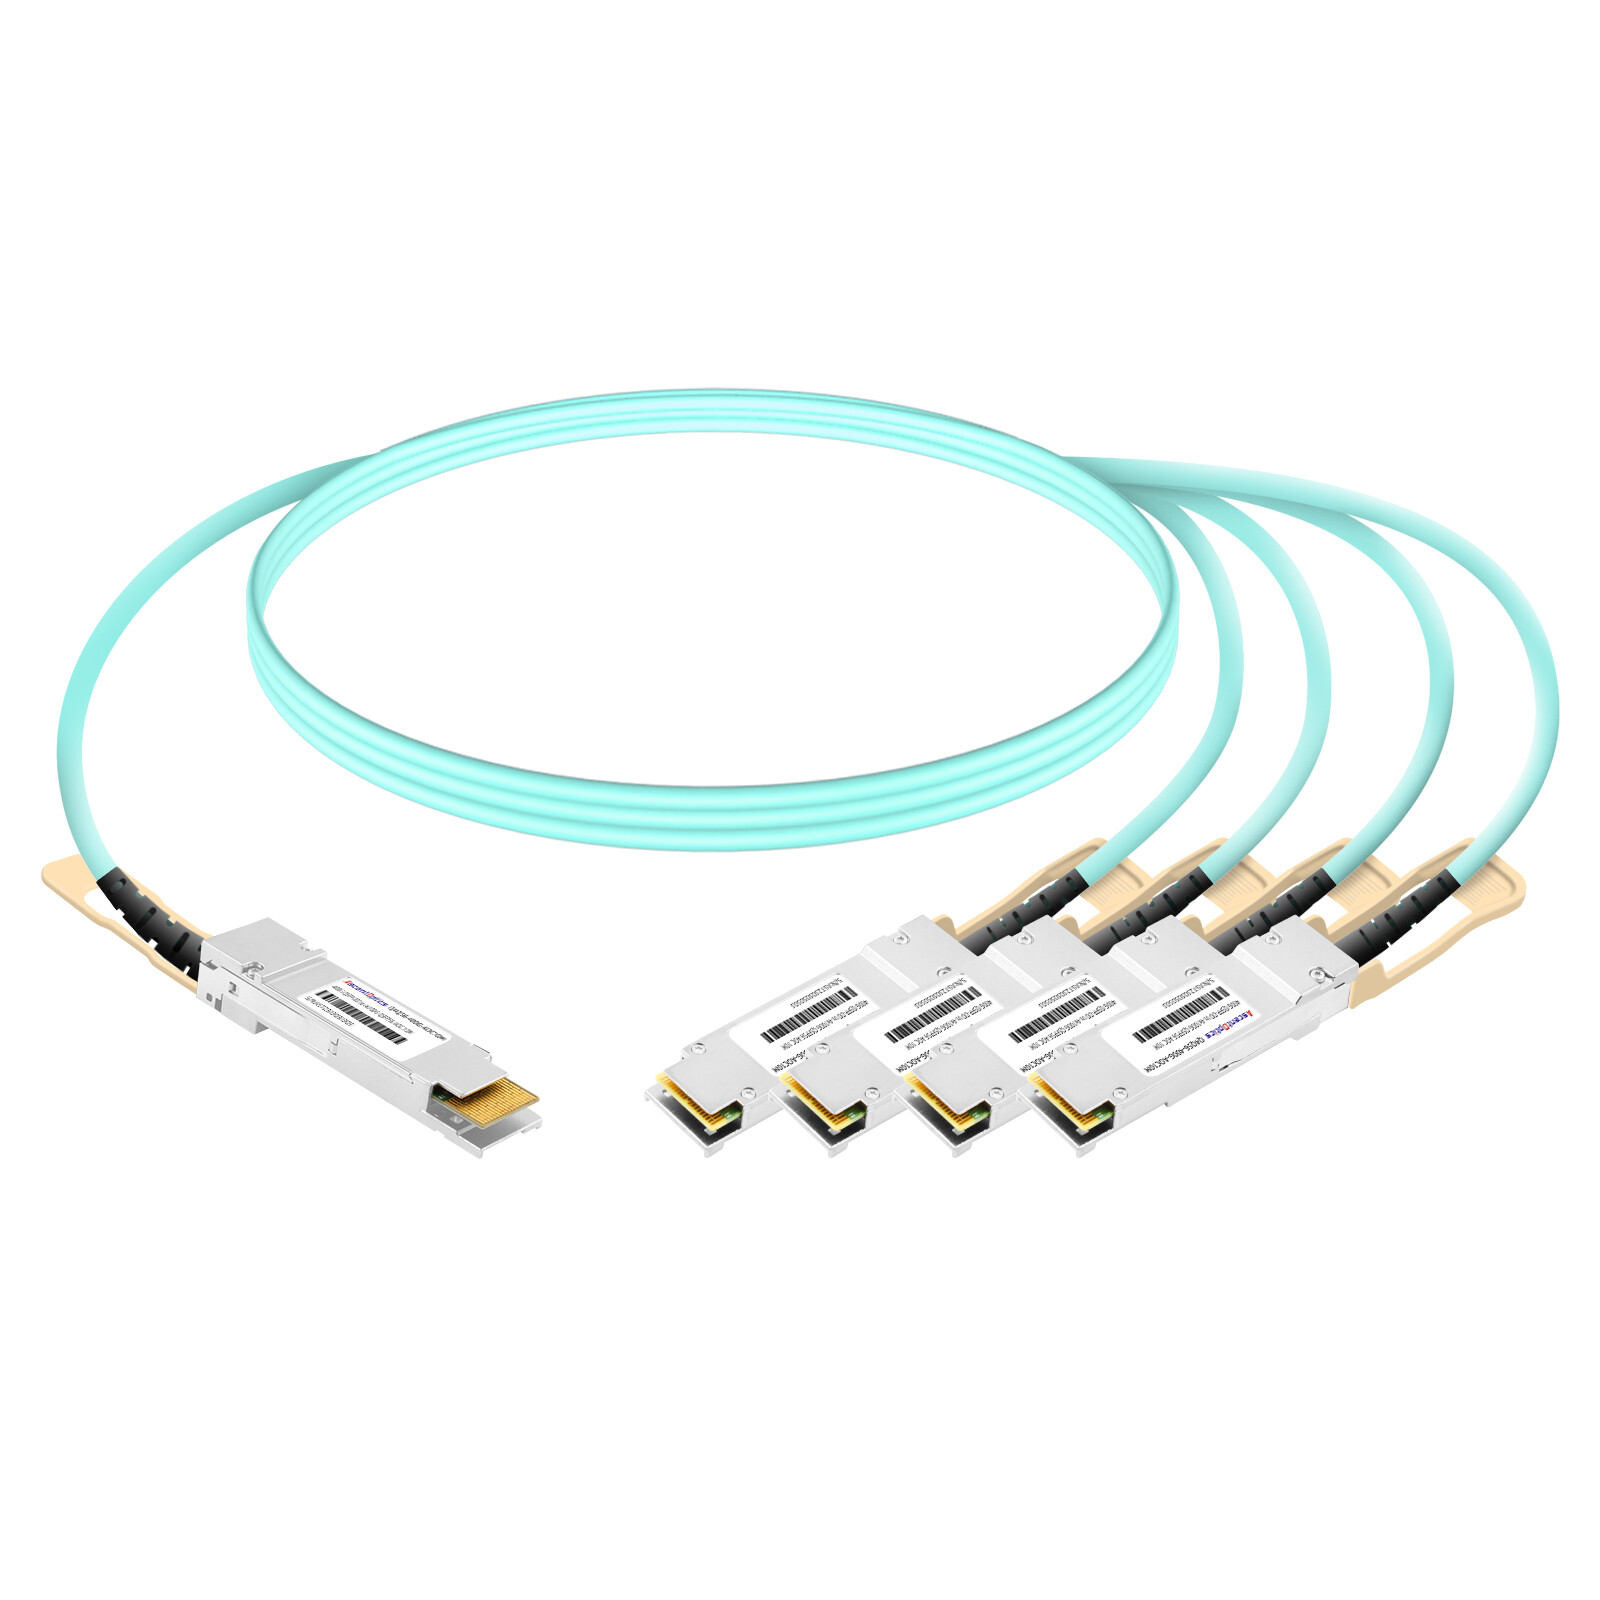 400G QSFP-DD to 4x 100G QSFP56 Breakout AOC Cable,10 Meters